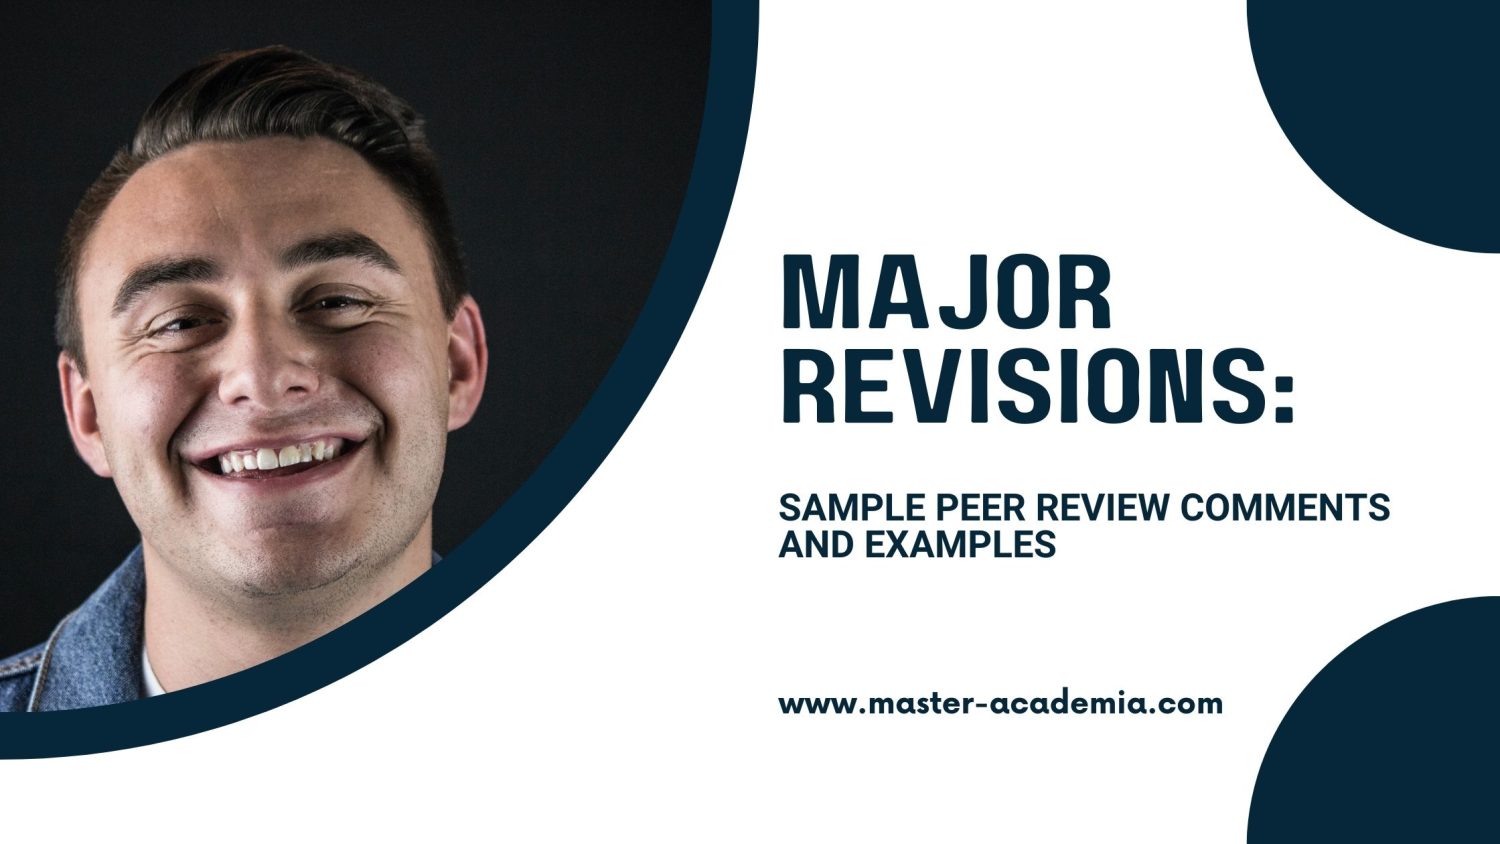 Featured blog post image for Major revisions - sample peer review comments and examples